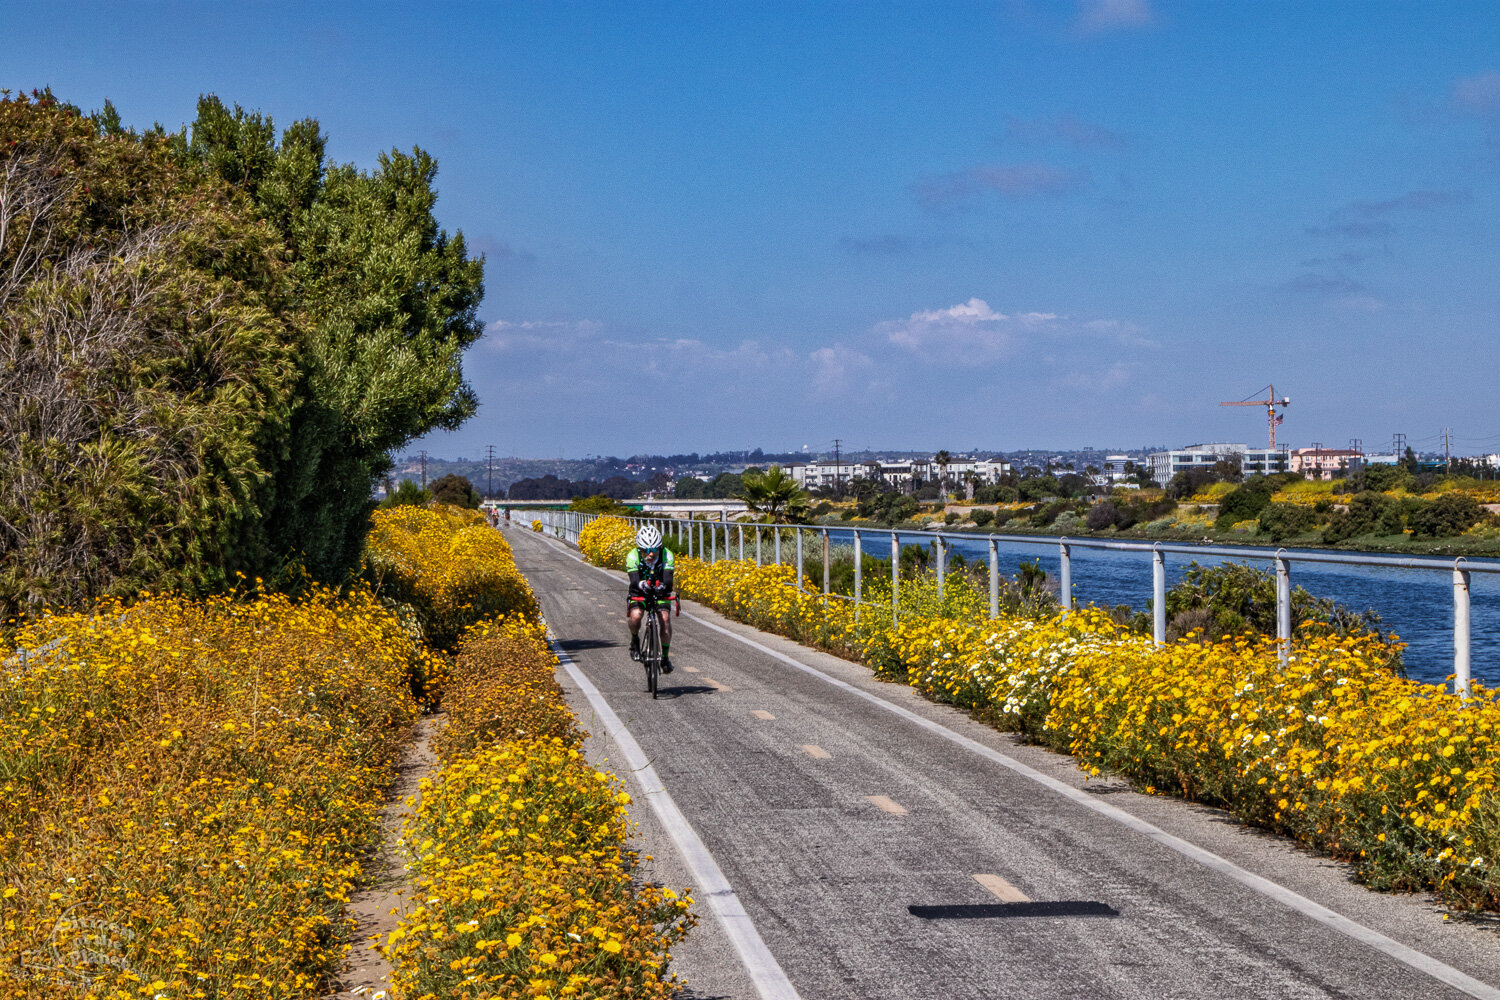  A six-mile bike path takes cyclists from Culver City down to the creek’s mouth at Marina Del Rey. The beautiful winding path can challenge a cyclist’s attention, between views of the river’s diverse bird life and springtime’s abundant wildflowers. 